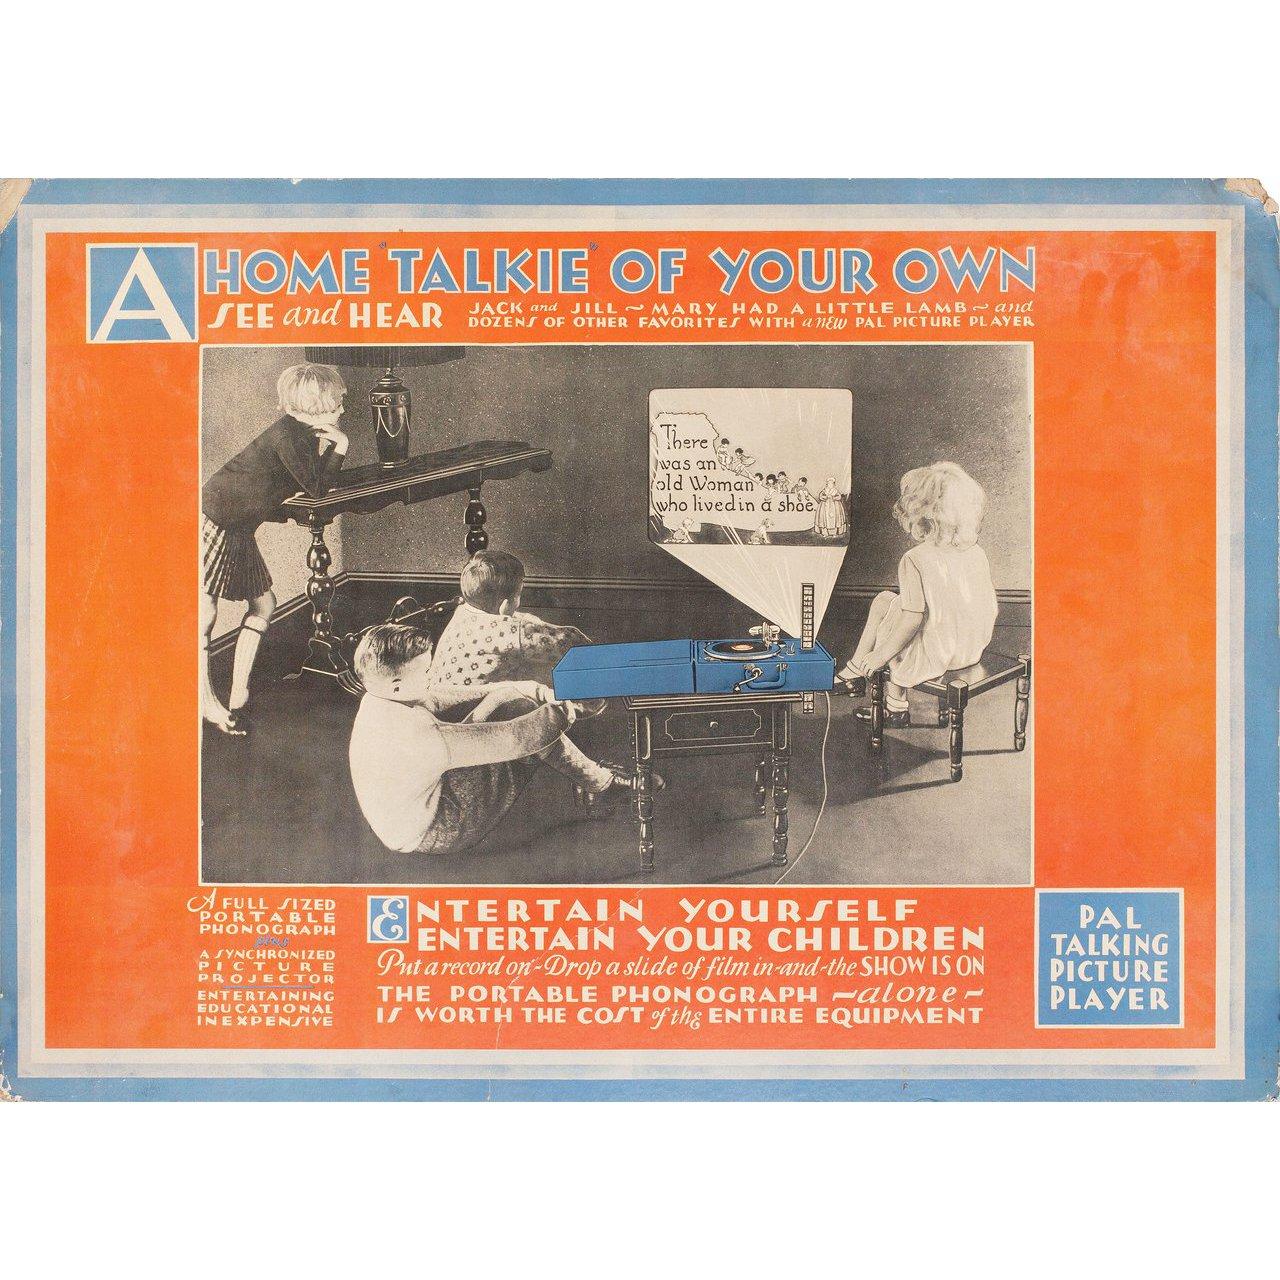 Original 1920s U.S. poster for Pal Talking Picture Player (1920s). Very good condition, rolled. Please note: the size is stated in inches and the actual size can vary by an inch or more.
  